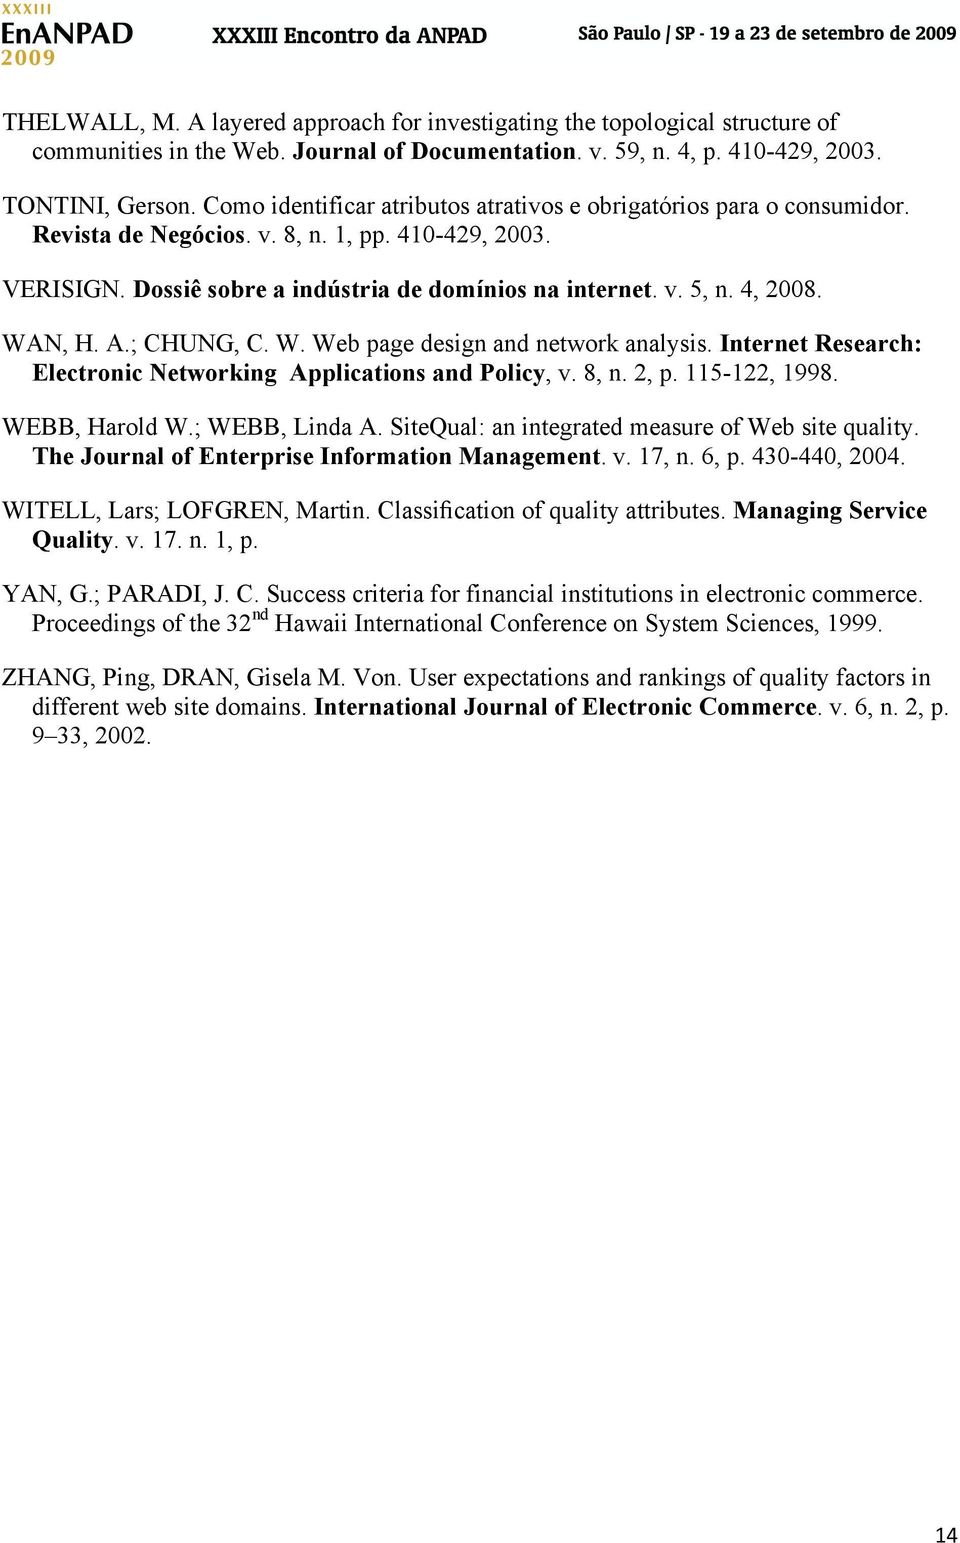 WAN, H. A.; CHUNG, C. W. Web page design and network analysis. Internet Research: Electronic Networking Applications and Policy, v. 8, n. 2, p. 115-122, 1998. WEBB, Harold W.; WEBB, Linda A.